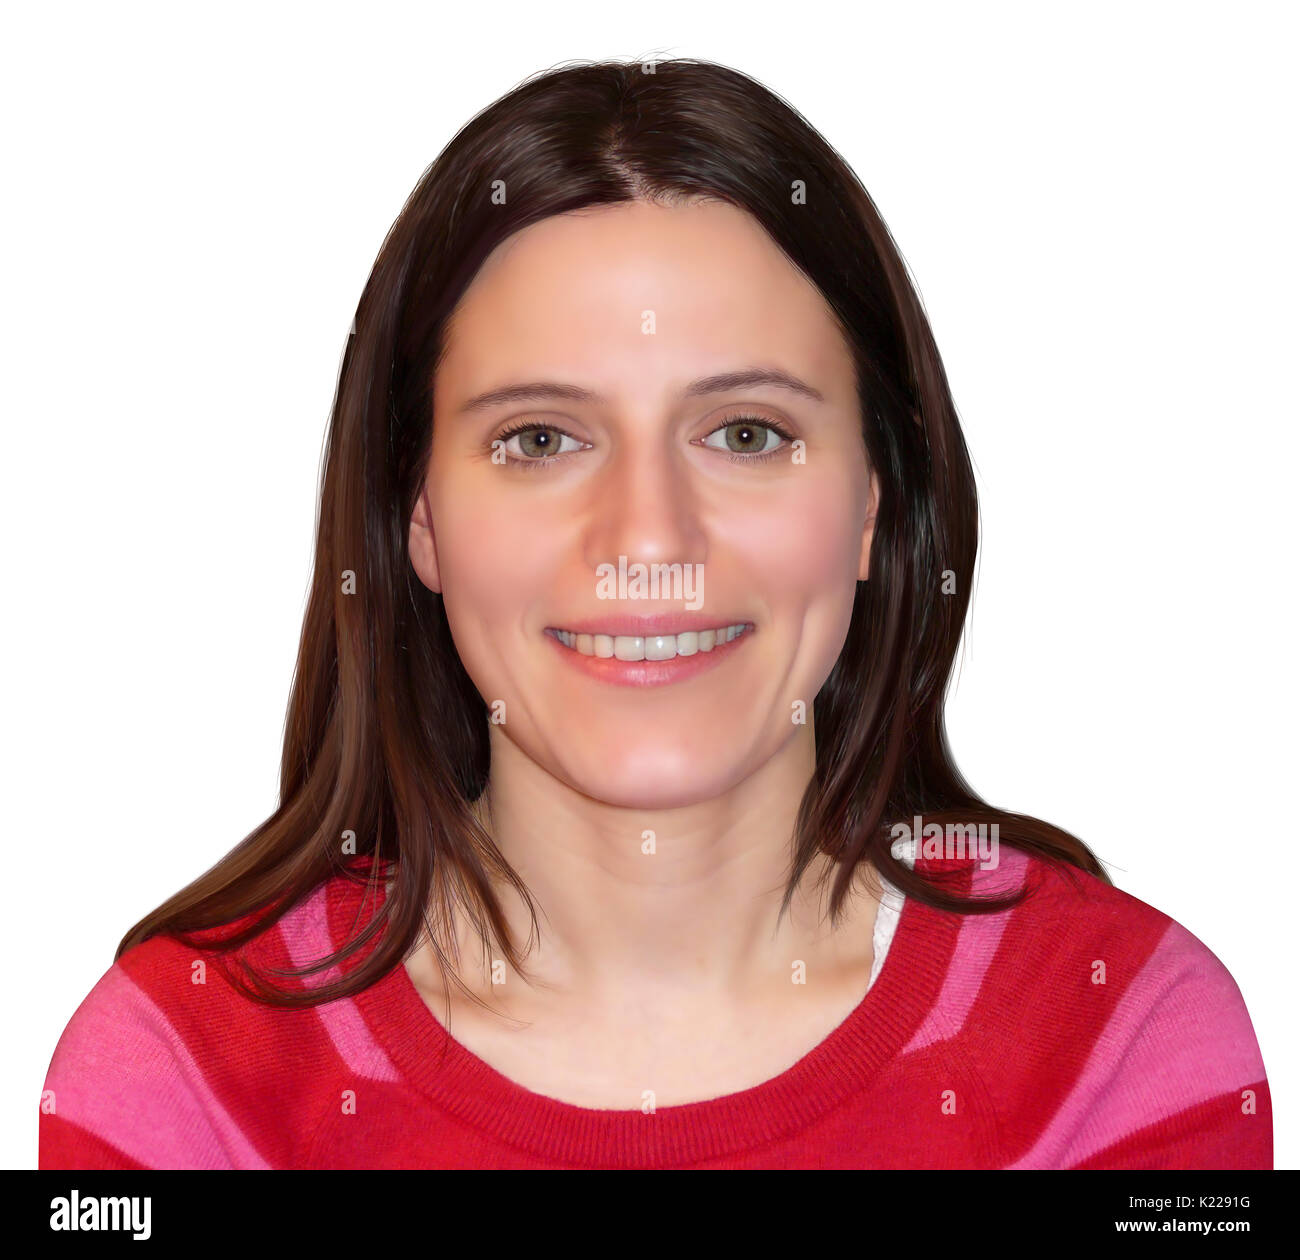 This image shows the morphology of the face of a woman. Stock Photo